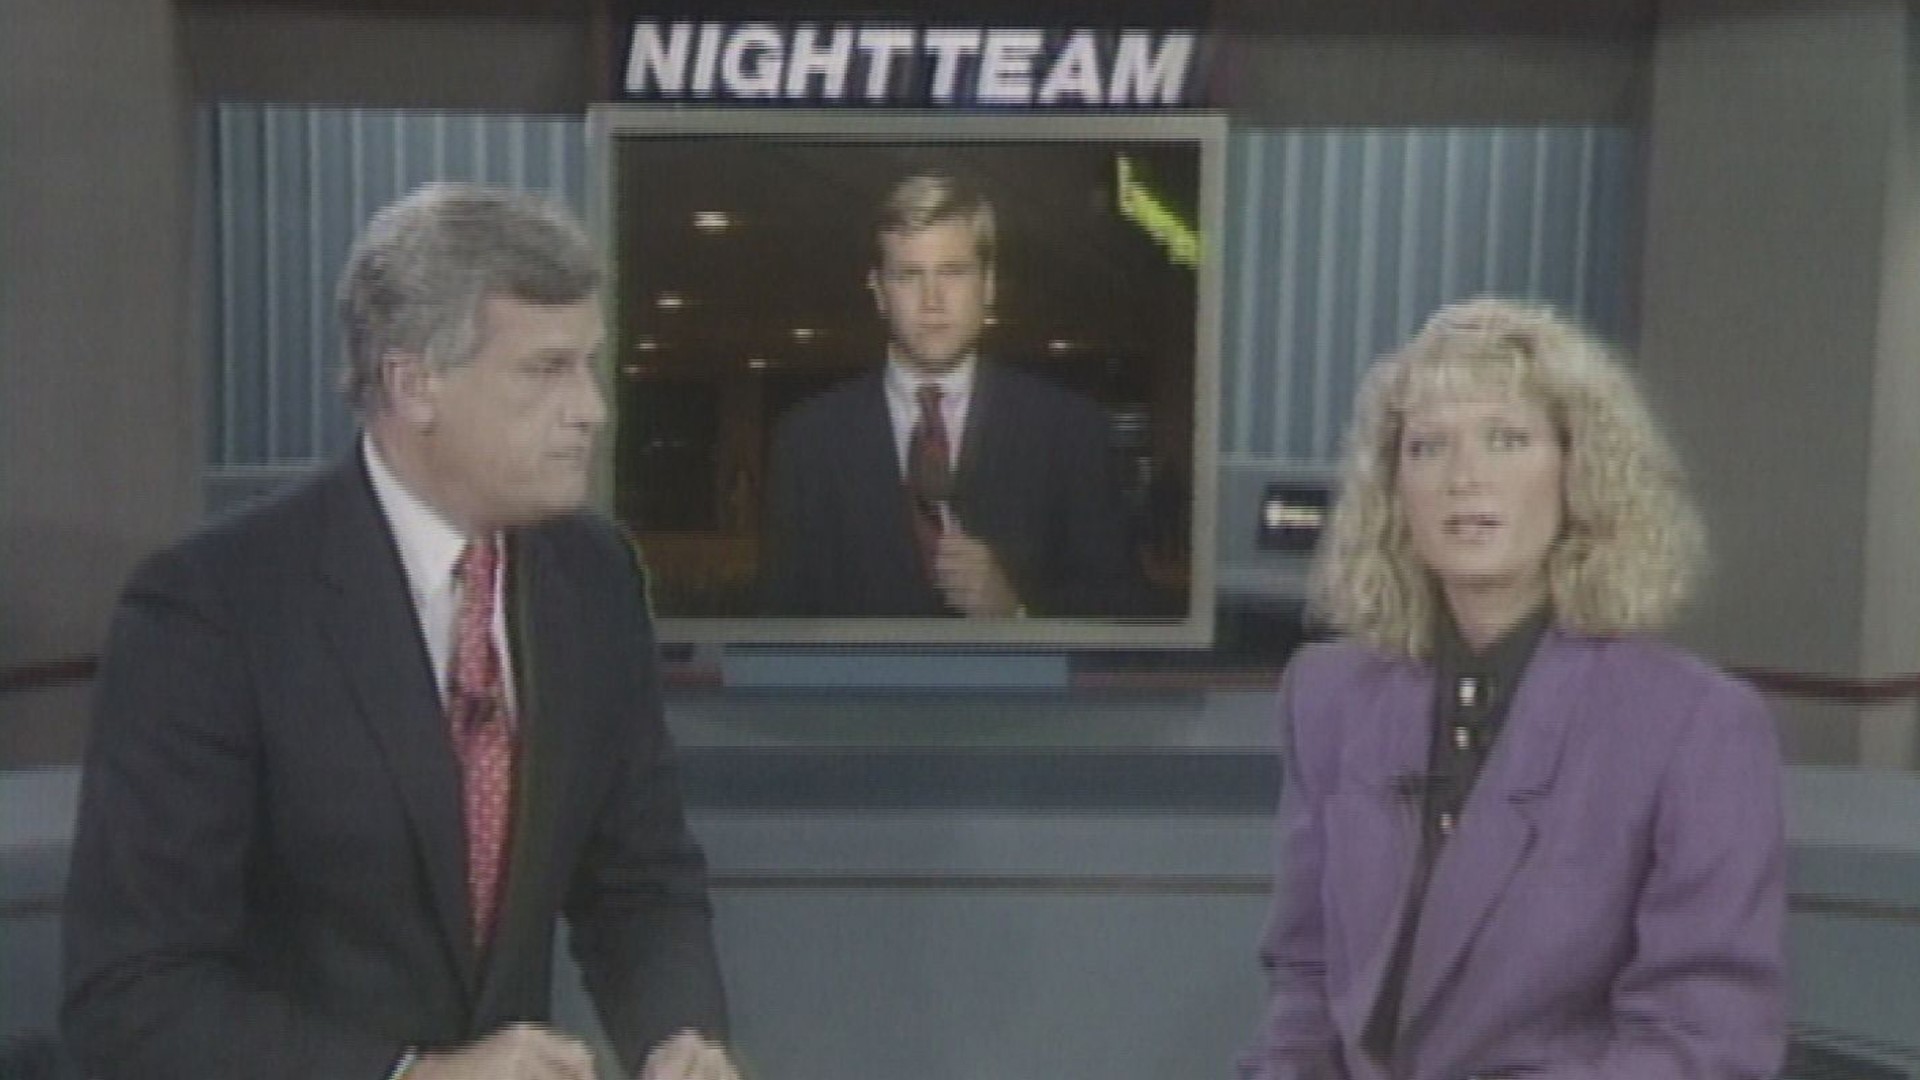 Former WHAS11 news anchor Melissa Forsythe died at the age of 71. According to her sister, Forsythe died of natural causes at her Louisville home.